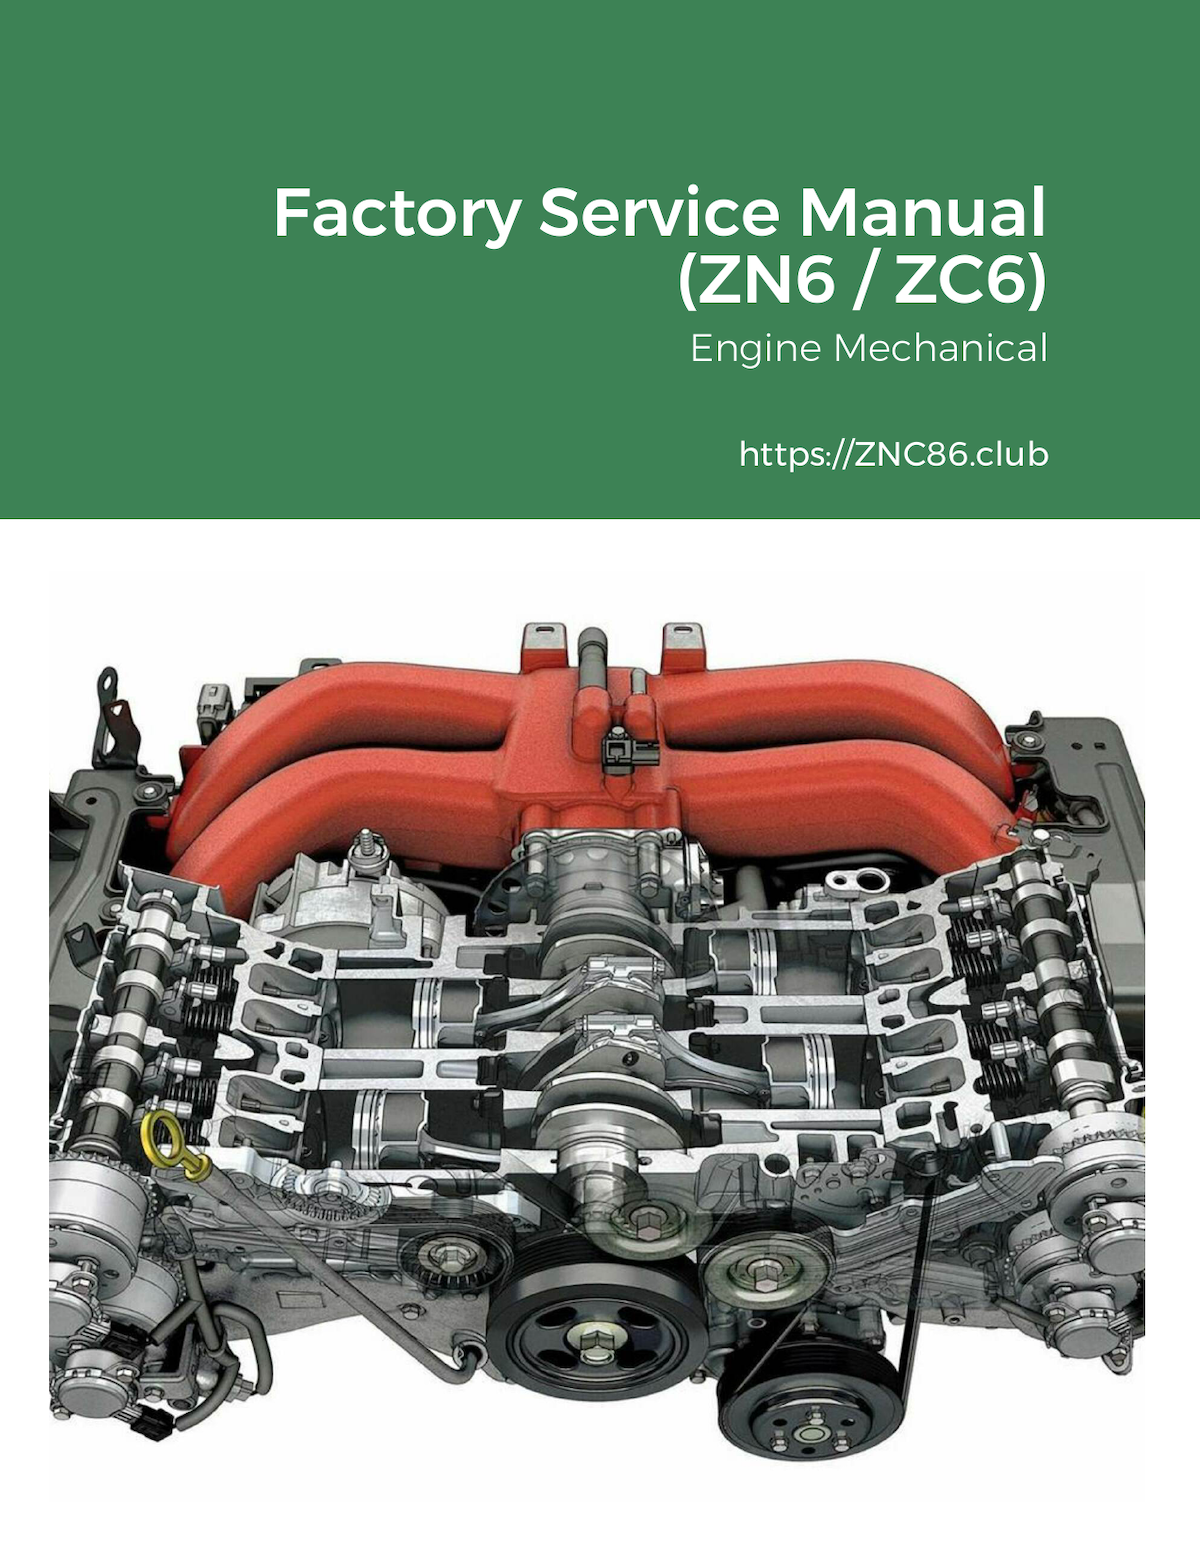 Cover of ZN6 ZC6 Factory Service Manual Engine Mechanical